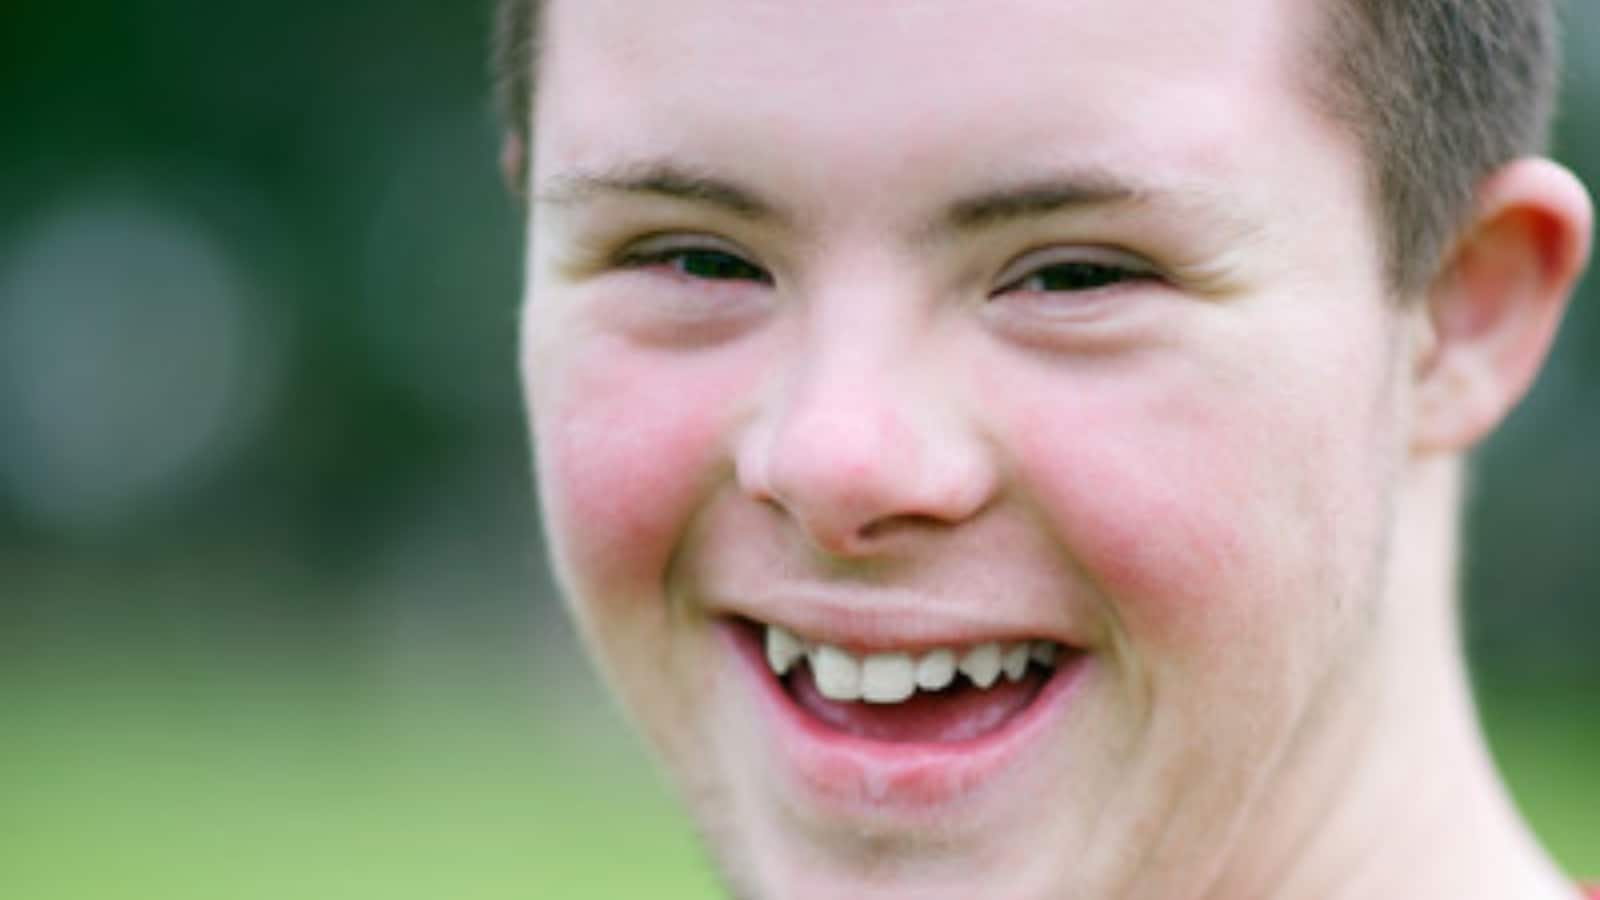 Up-close image of the smiling face of a teenager with Down syndrome.